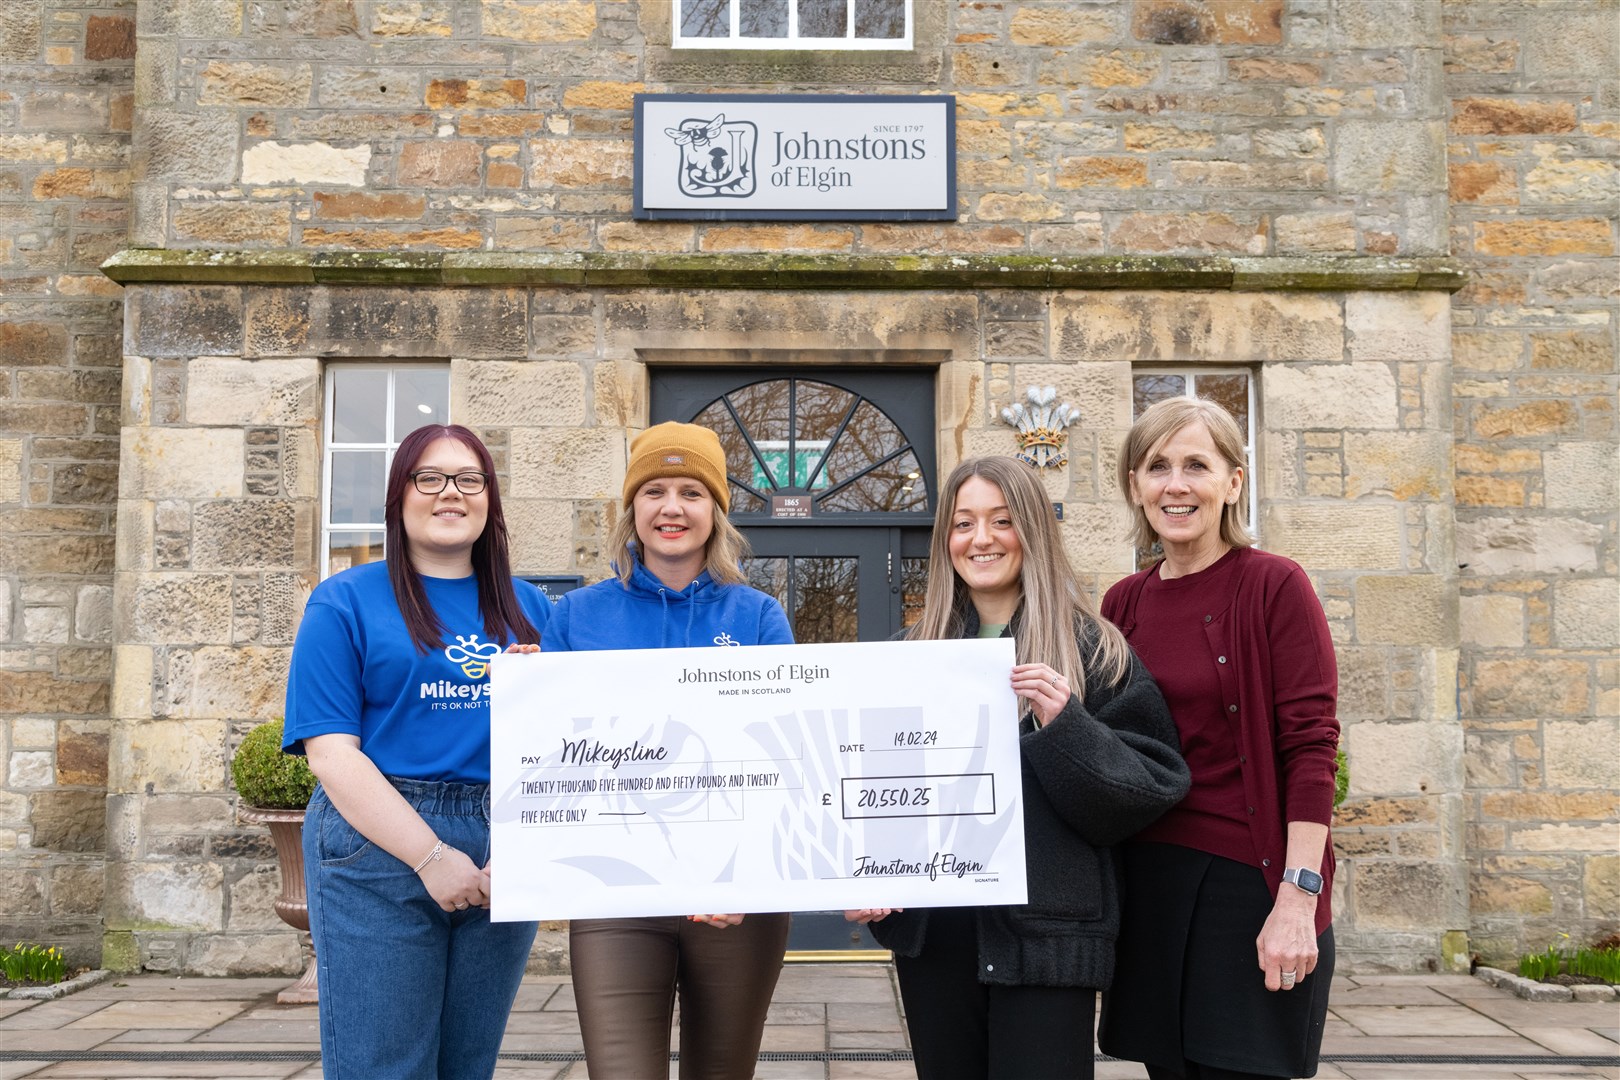 From left: Chloe O'Connor (Fundraising and Events Coordinator), Allana Stables (Bee the Change Manager) from Mikeysline with Darcie Stevenson (User Experience Coordinator) and Julia McGlashan (People Director) from Johnstons of Elgin. ..Johnstons of Elgin Charity Fundraising hands over a cheque for Â£20,550.25 to Mikeysline. ..Picture: Beth Taylor.